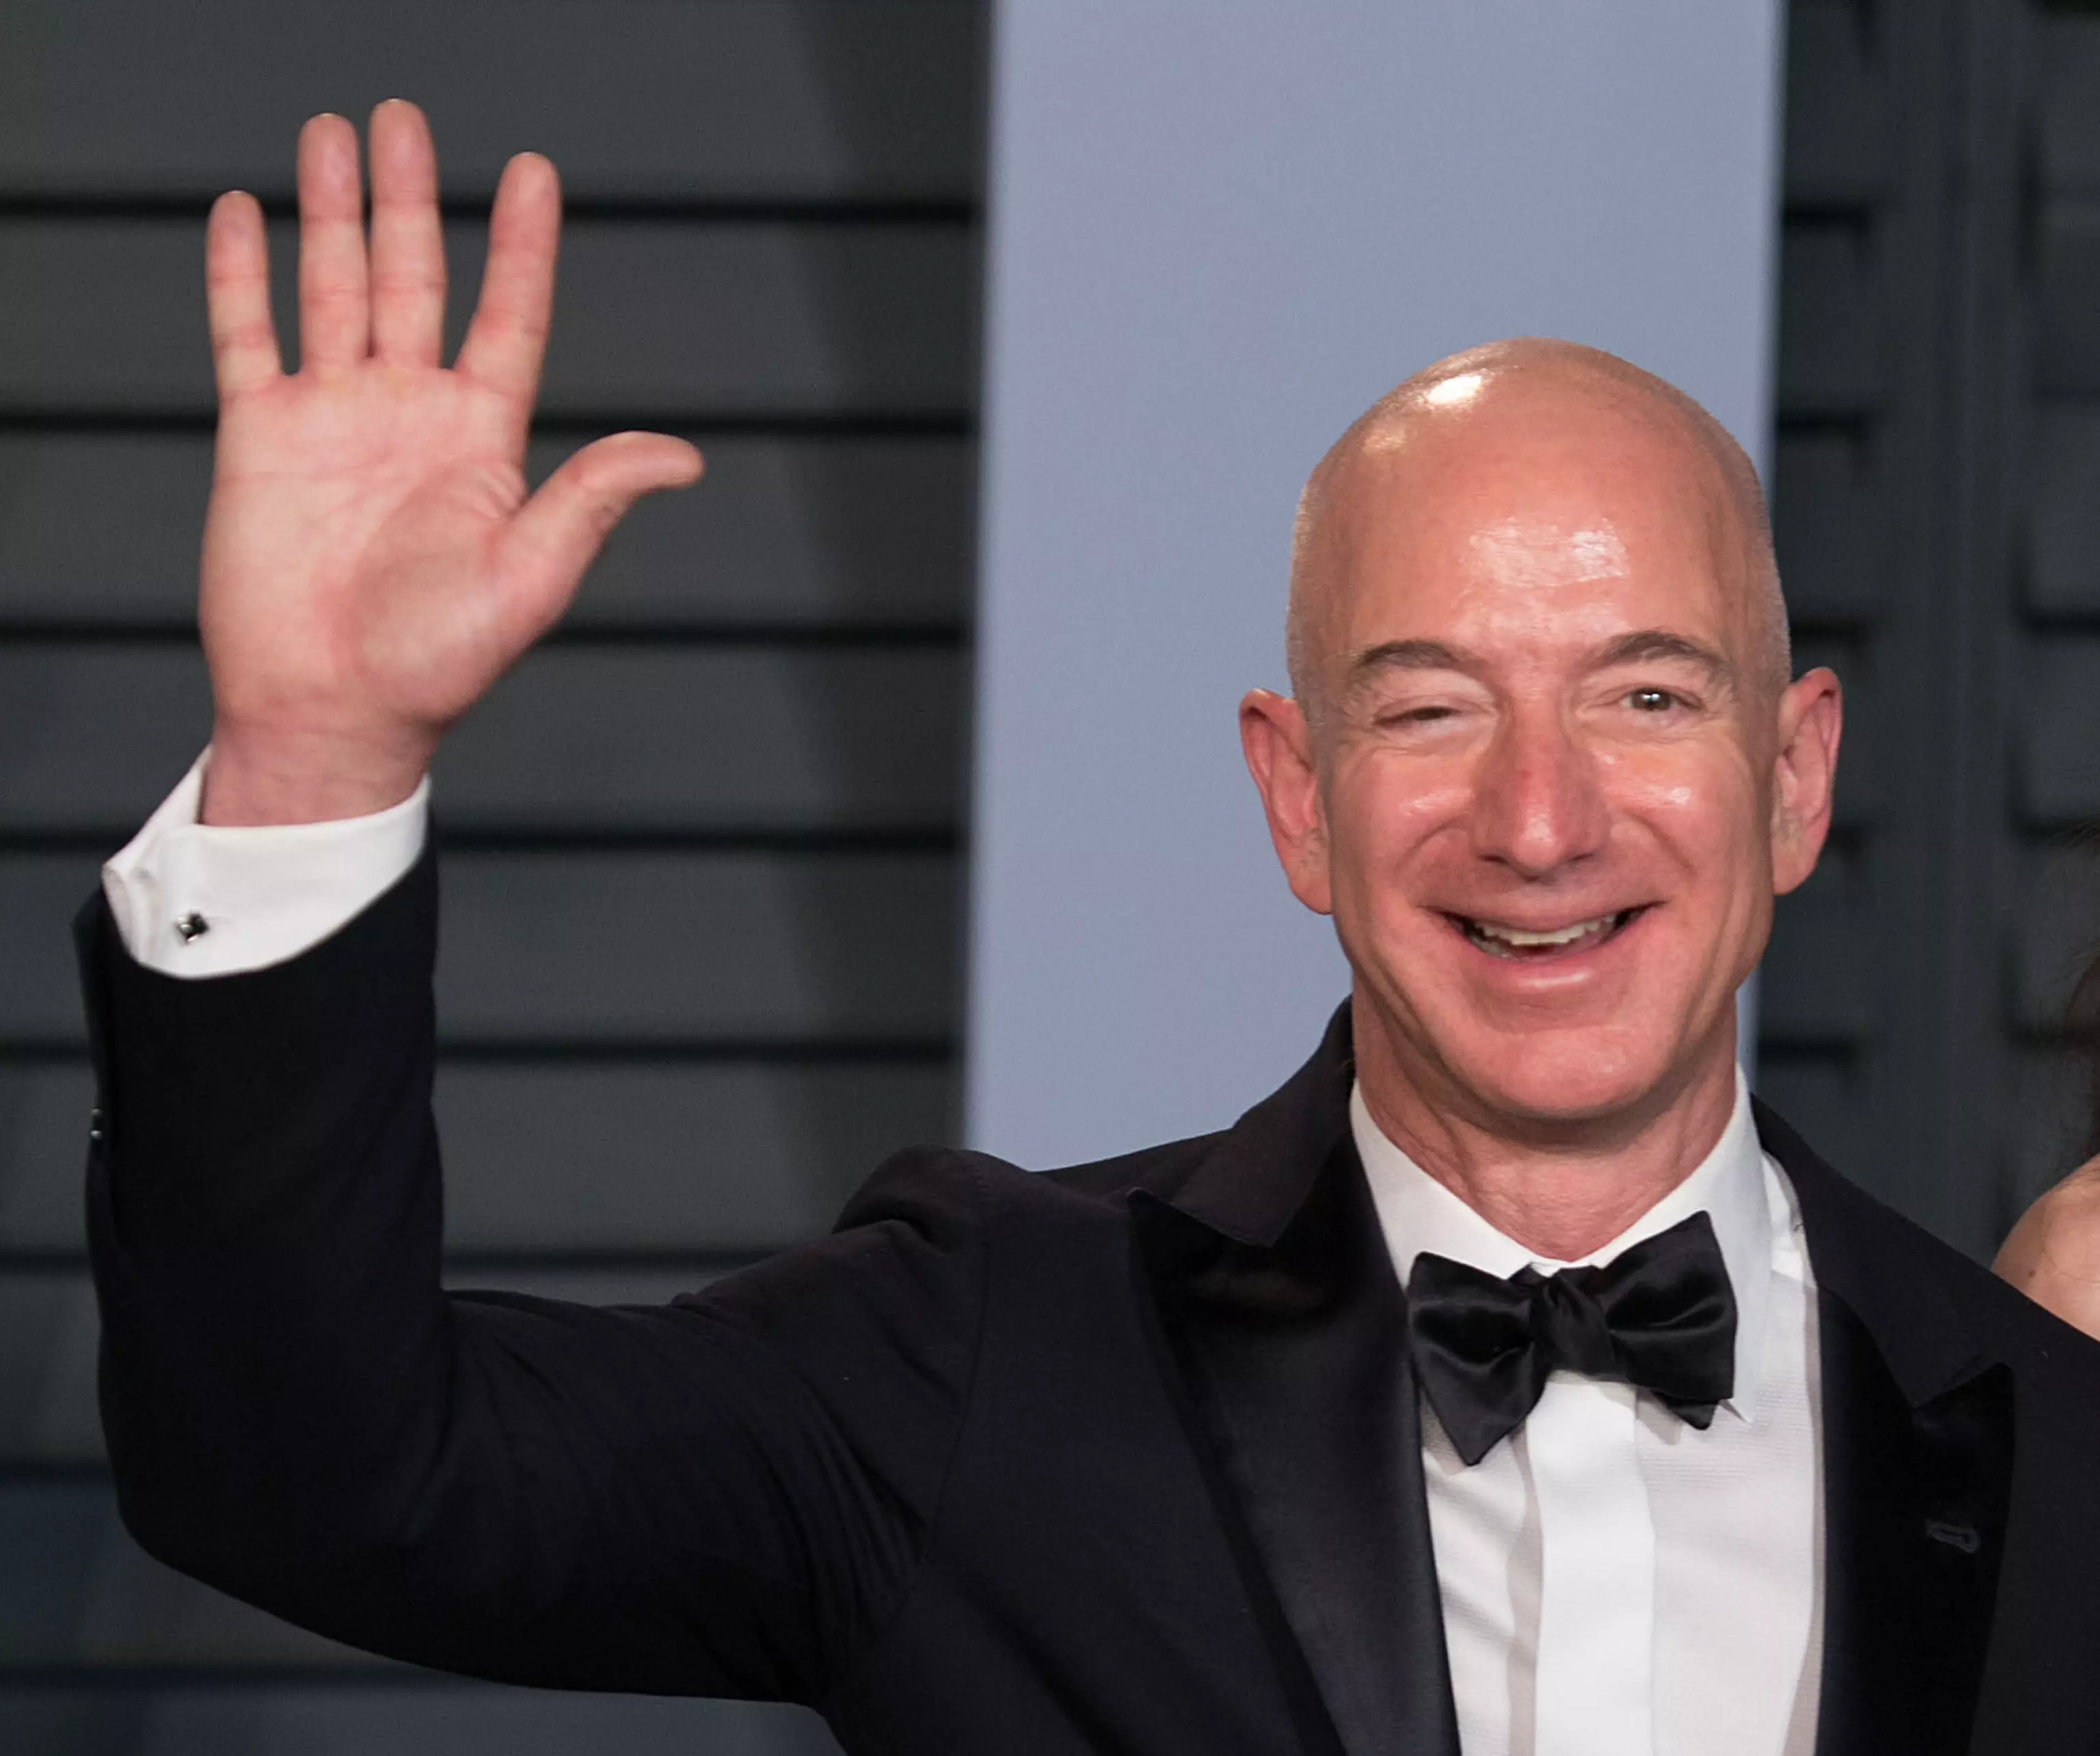 Bezos aims for eight hours of kip.